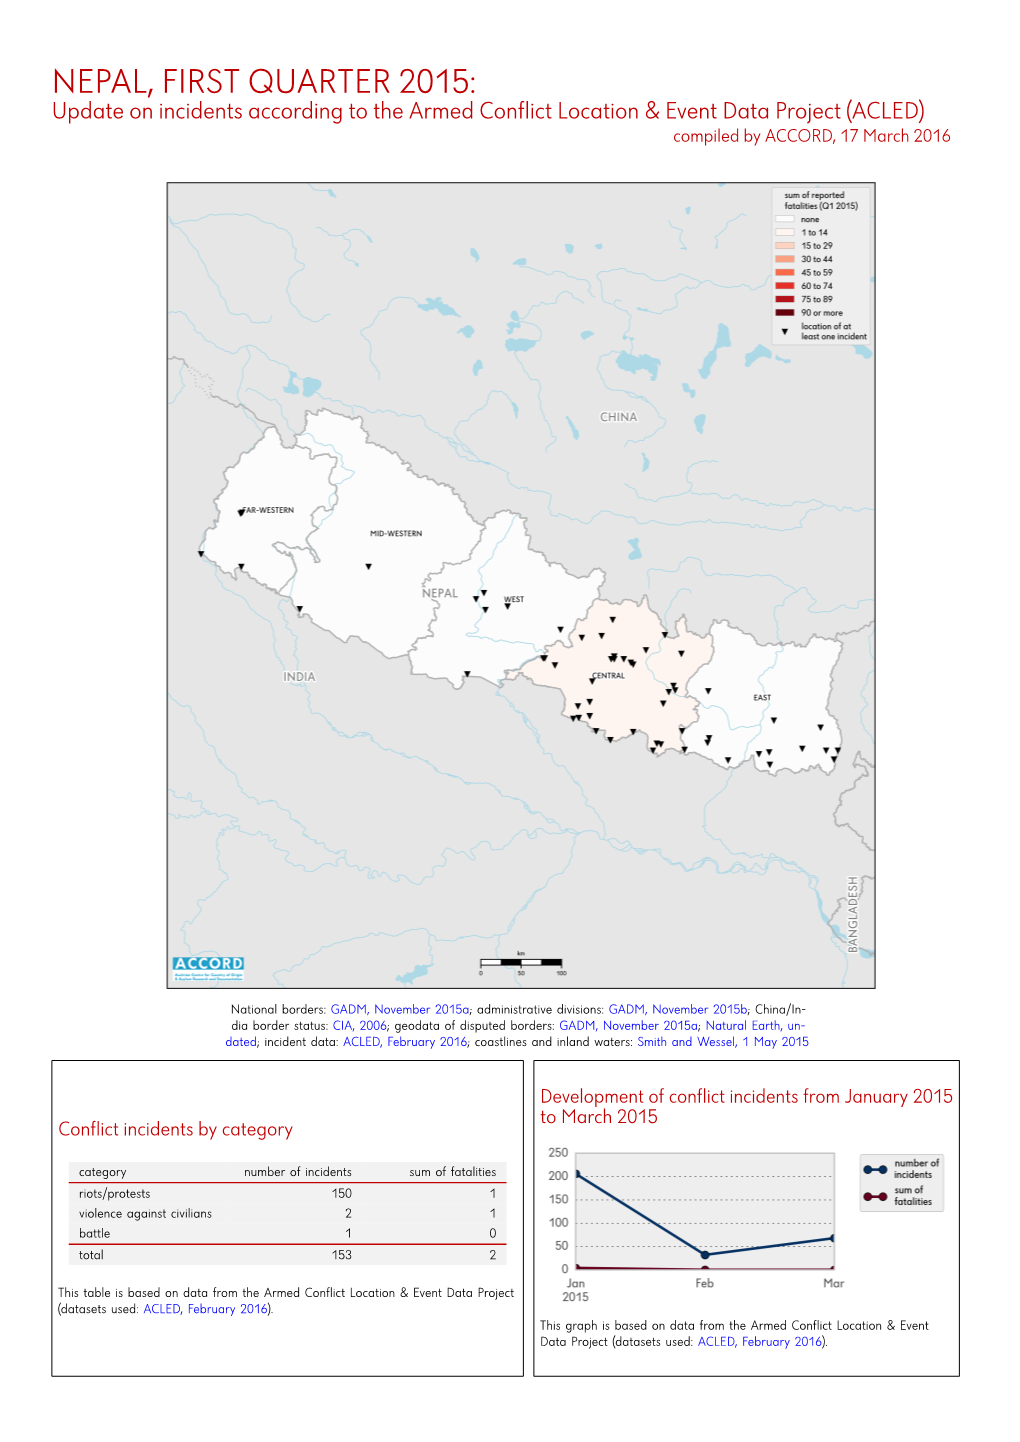 NEPAL, FIRST QUARTER 2015: Update on Incidents According to the Armed Conflict Location & Event Data Project (ACLED) Compiled by ACCORD, 17 March 2016